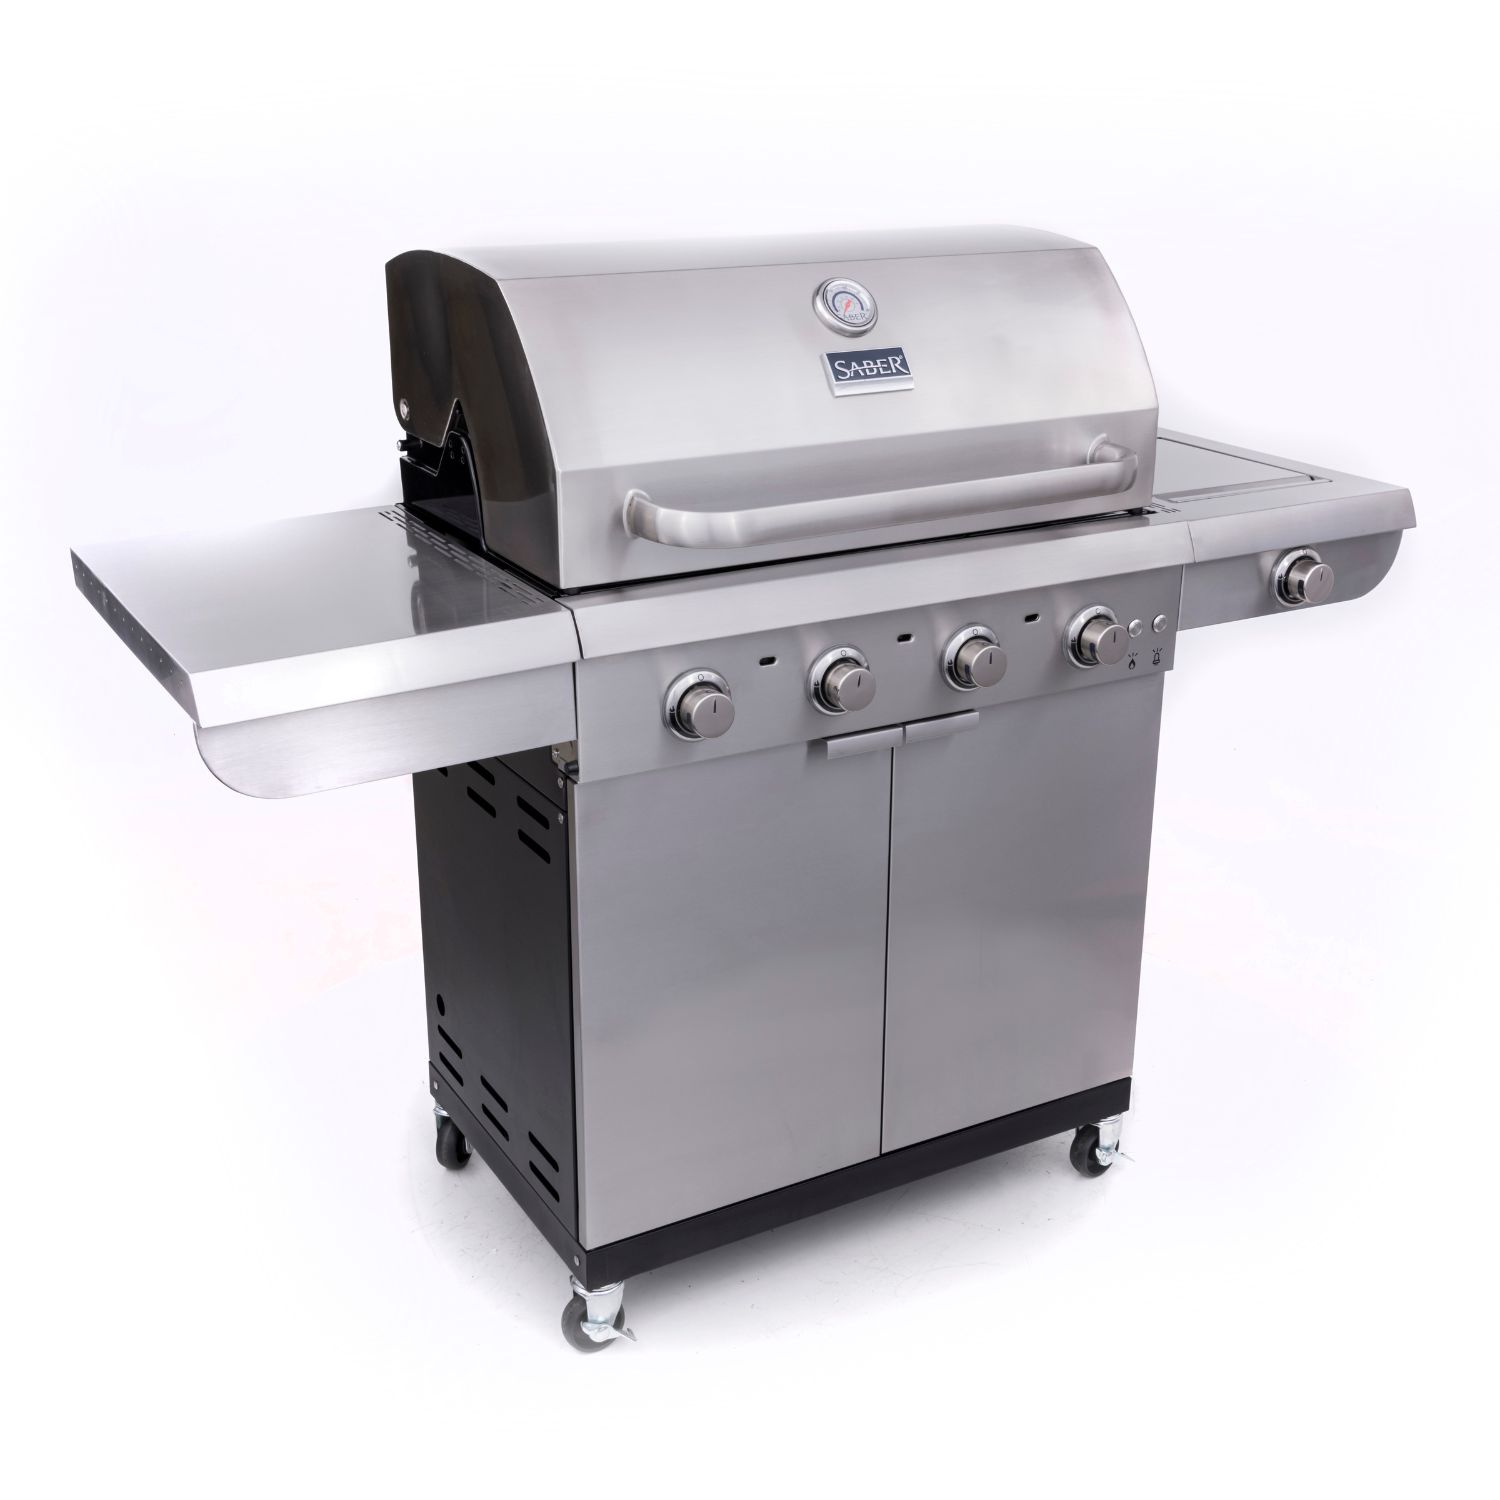 Barbecue Select (4) – Saber Grills